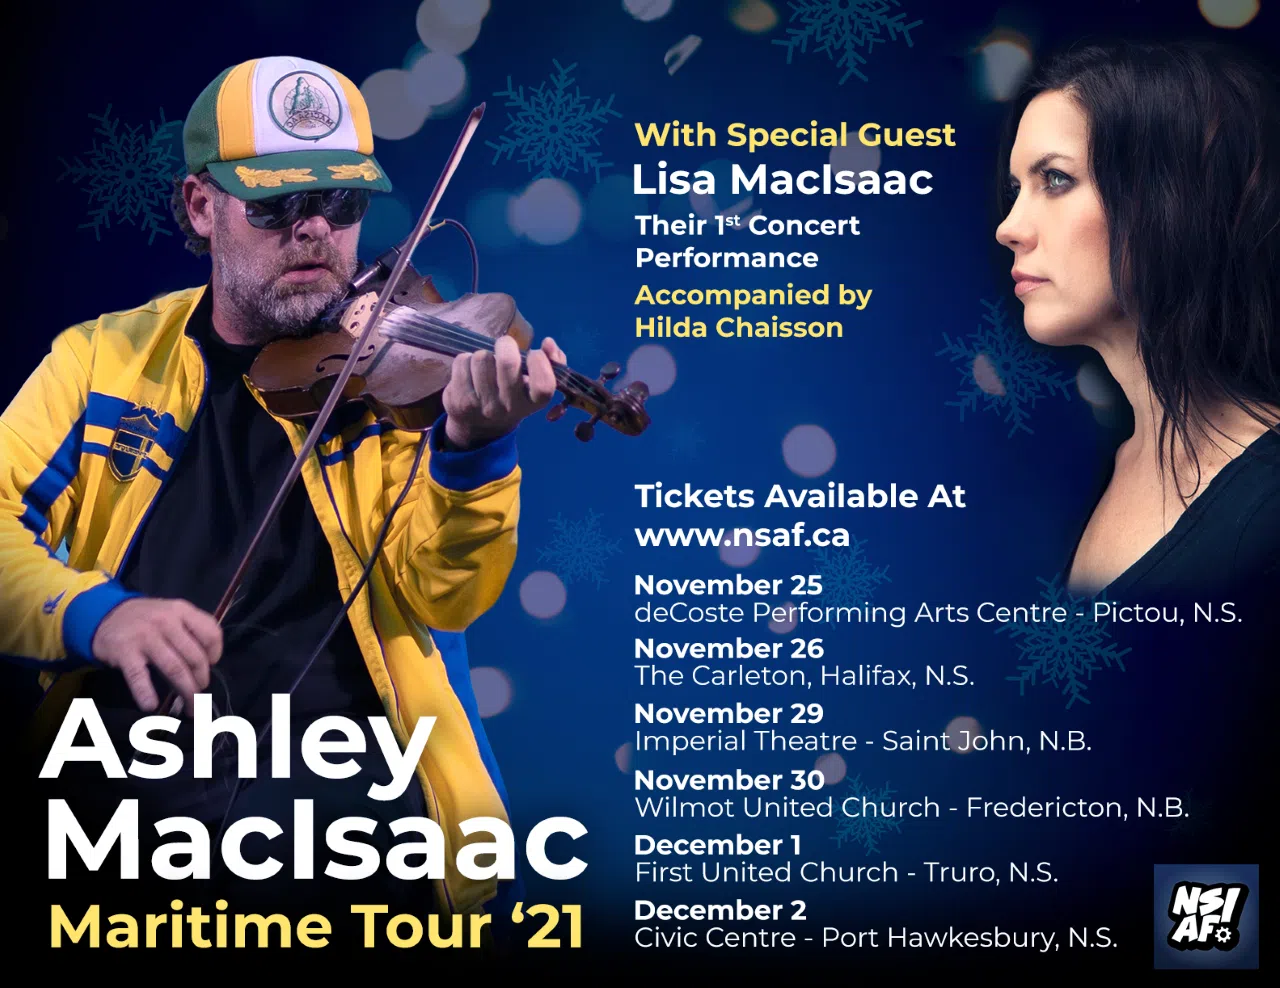 Scottie O talked with Ashley and Lisa MacIsaac about their upcoming Maritime Tour